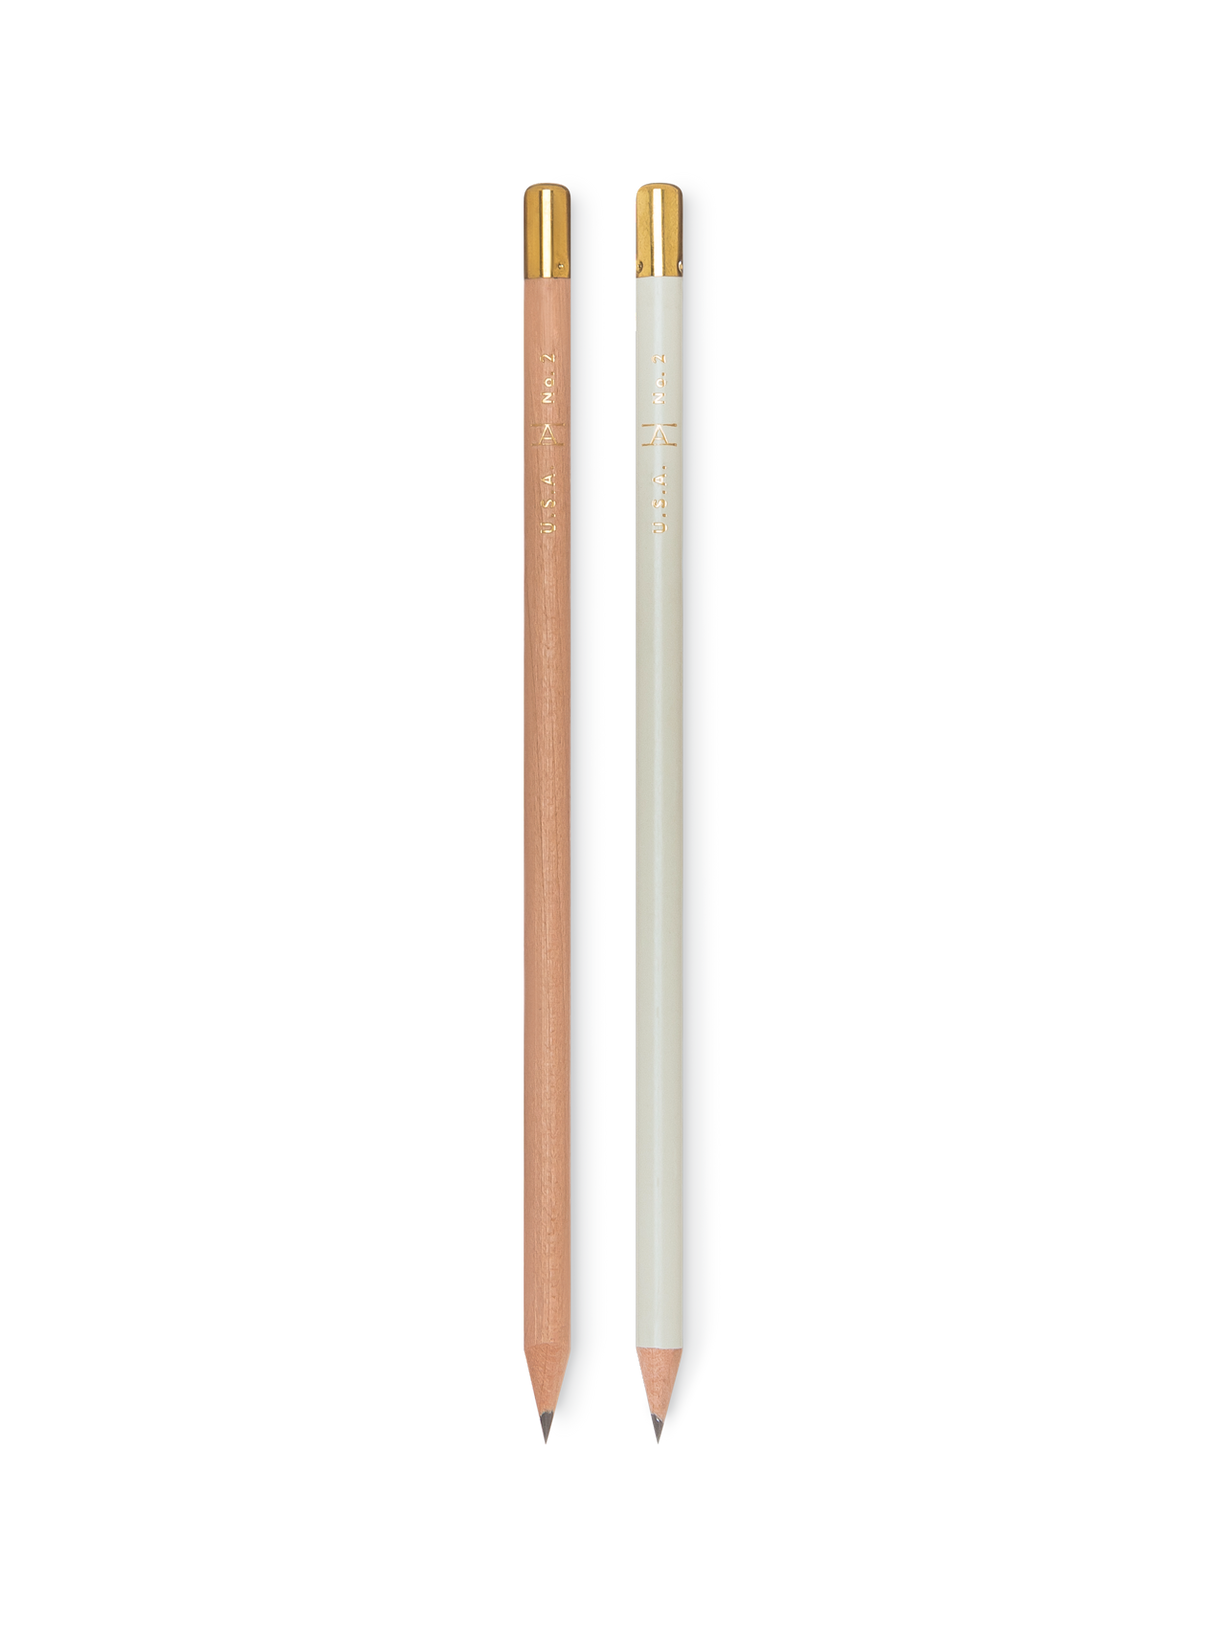 Appointed No. 2 Pencils in Natural and Cool Gray, sharpened with grass erasser caps and gold details